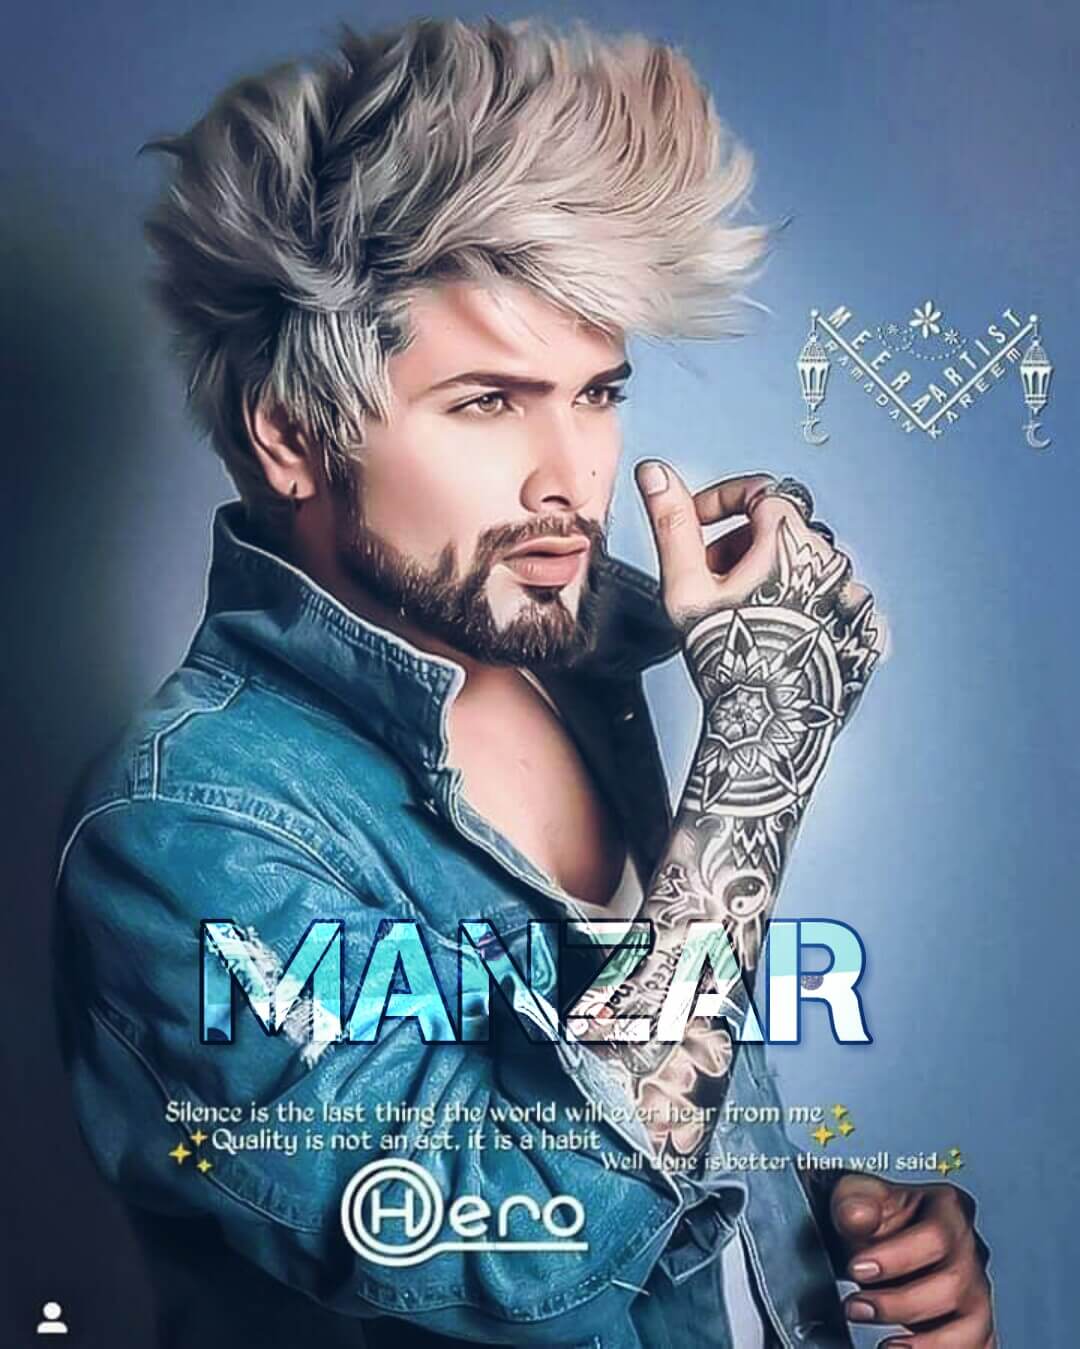 Stylish Boy Manzar Name Dp And Wallpaper Images